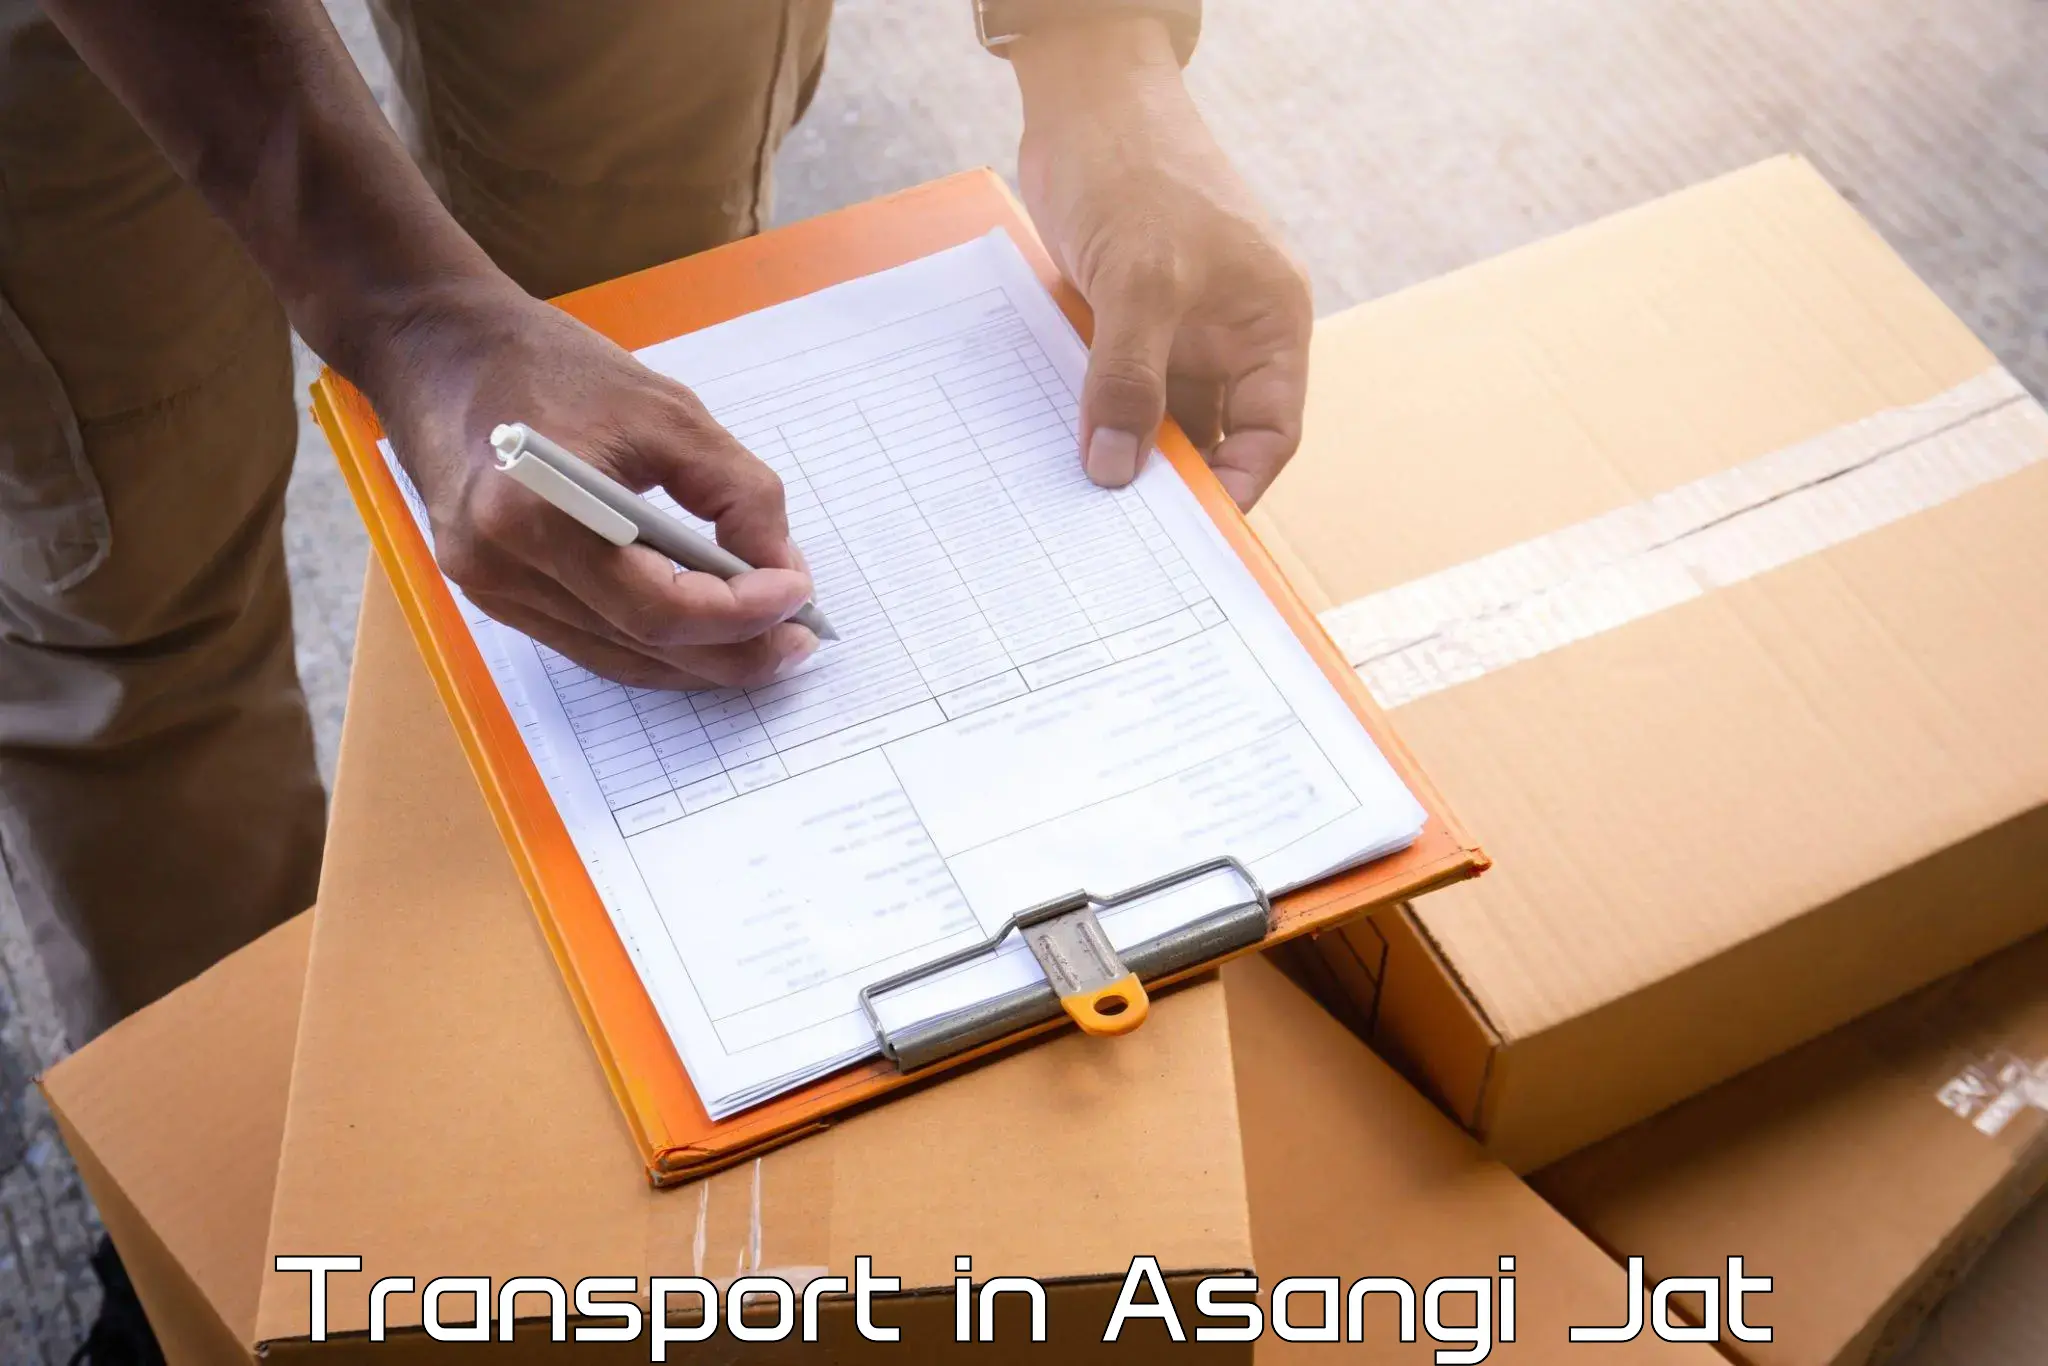 Vehicle courier services in Asangi Jat